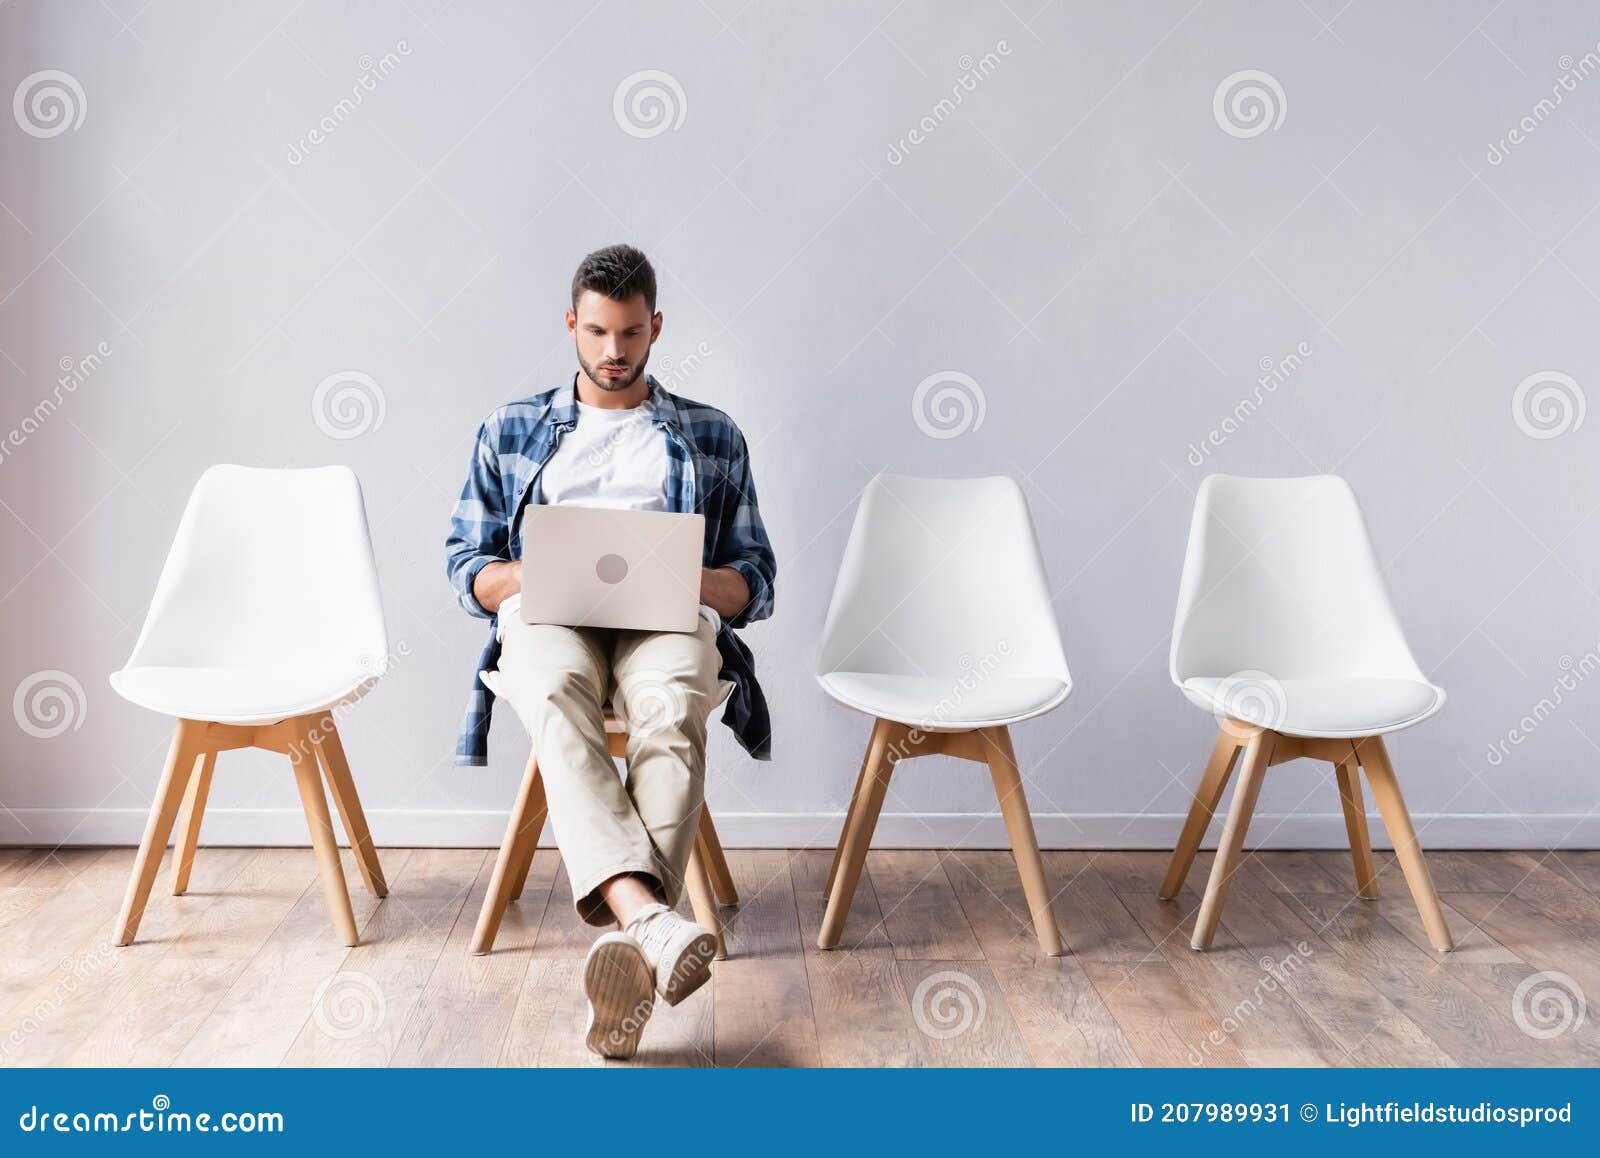 Man in Casual Clothes Waiting on Stock Image - Image of caucasian ...